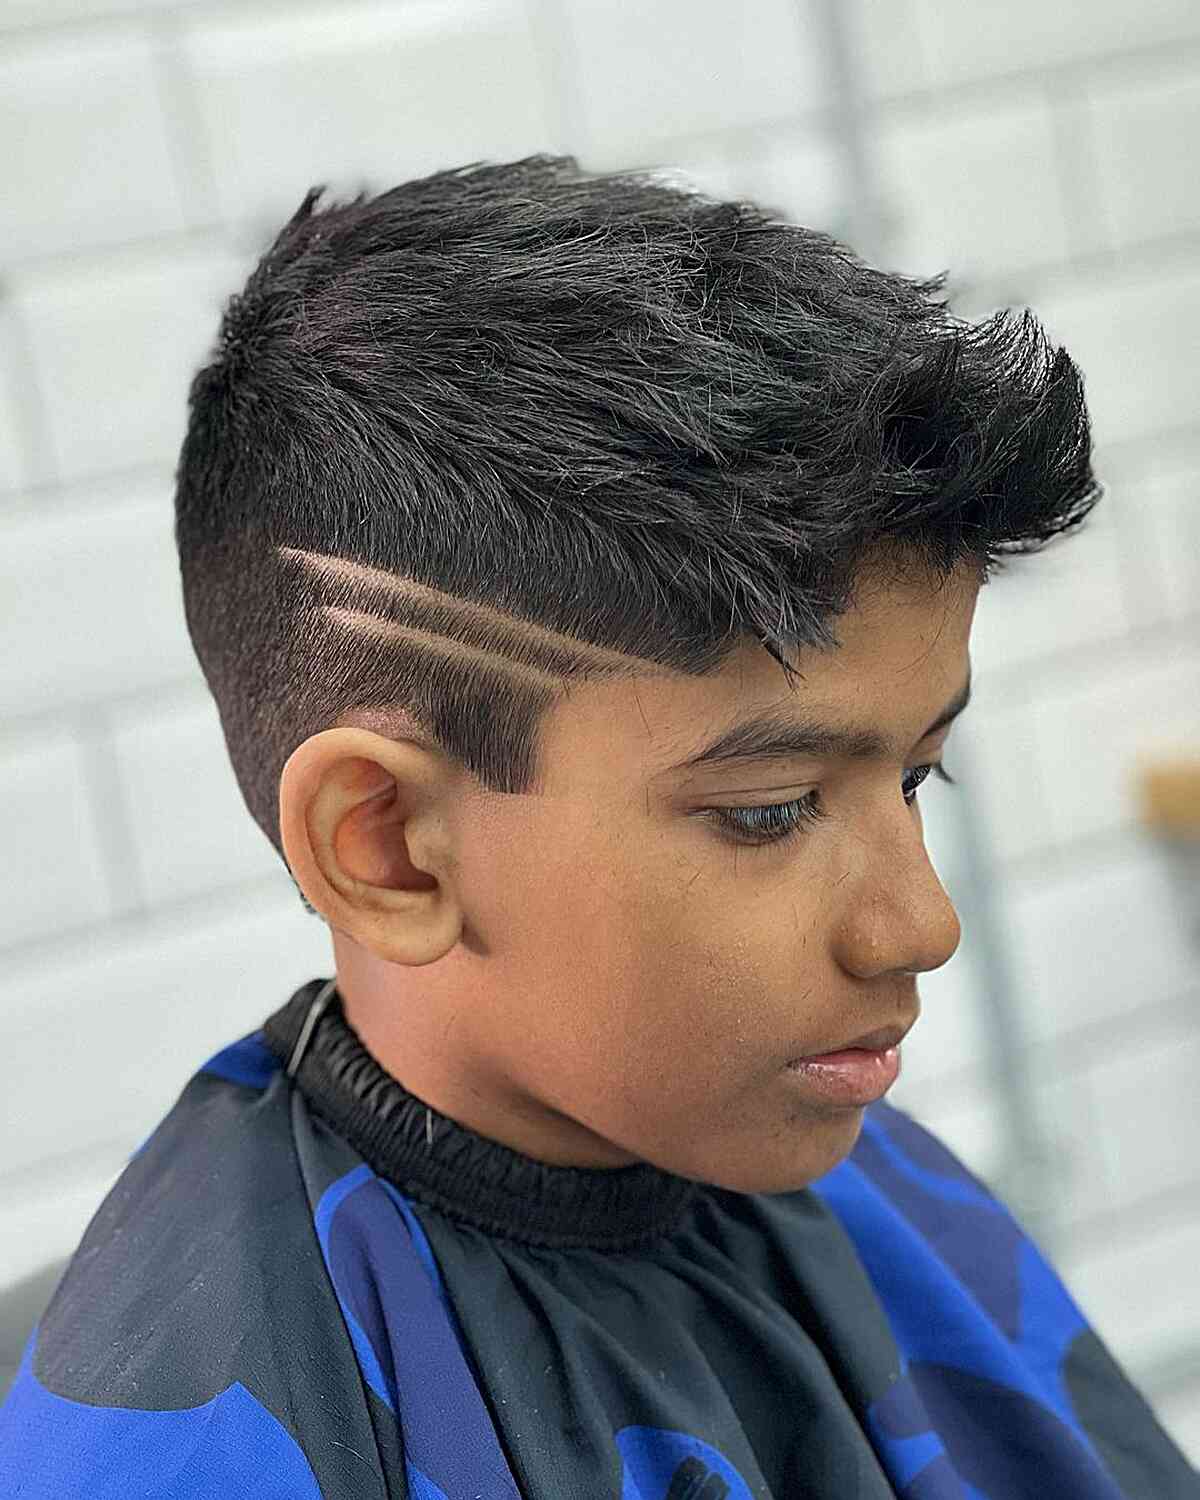 Short Faded Cut with Cool Designs for Boys